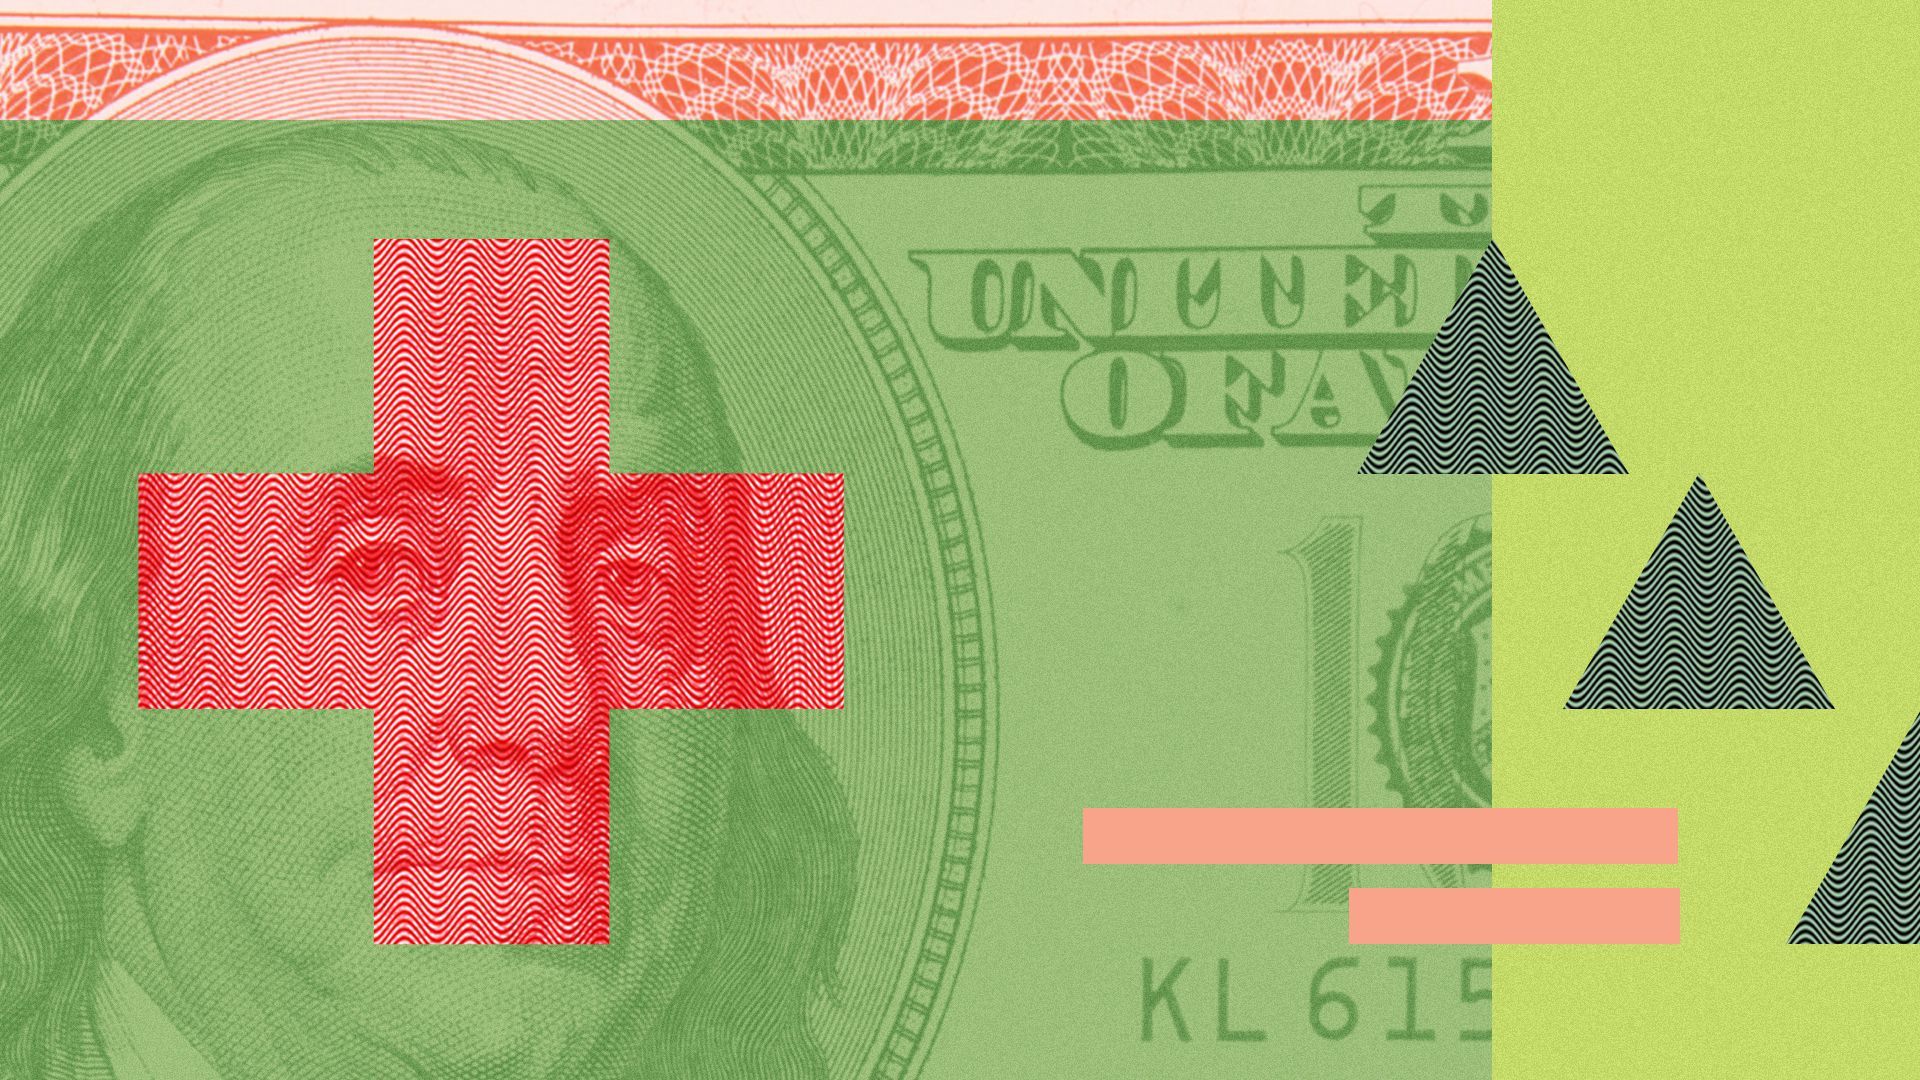 Illustration of a hundred dollar bill with red cross on it